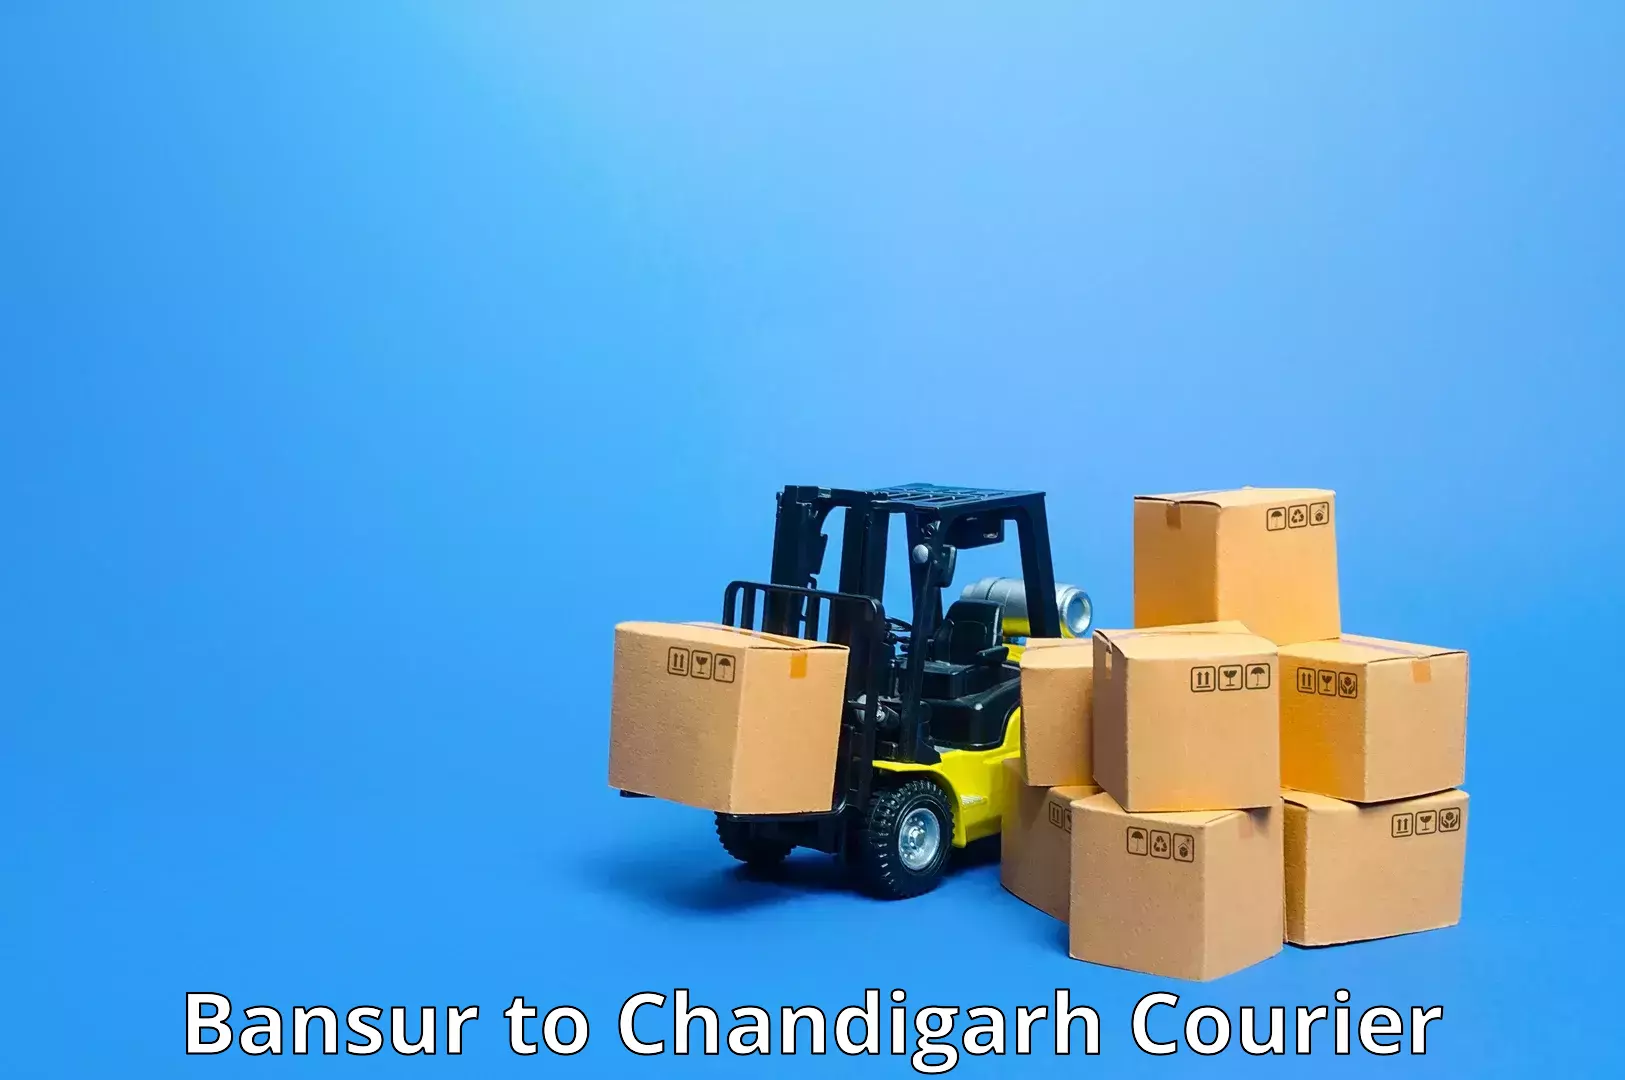 Courier service innovation Bansur to Chandigarh